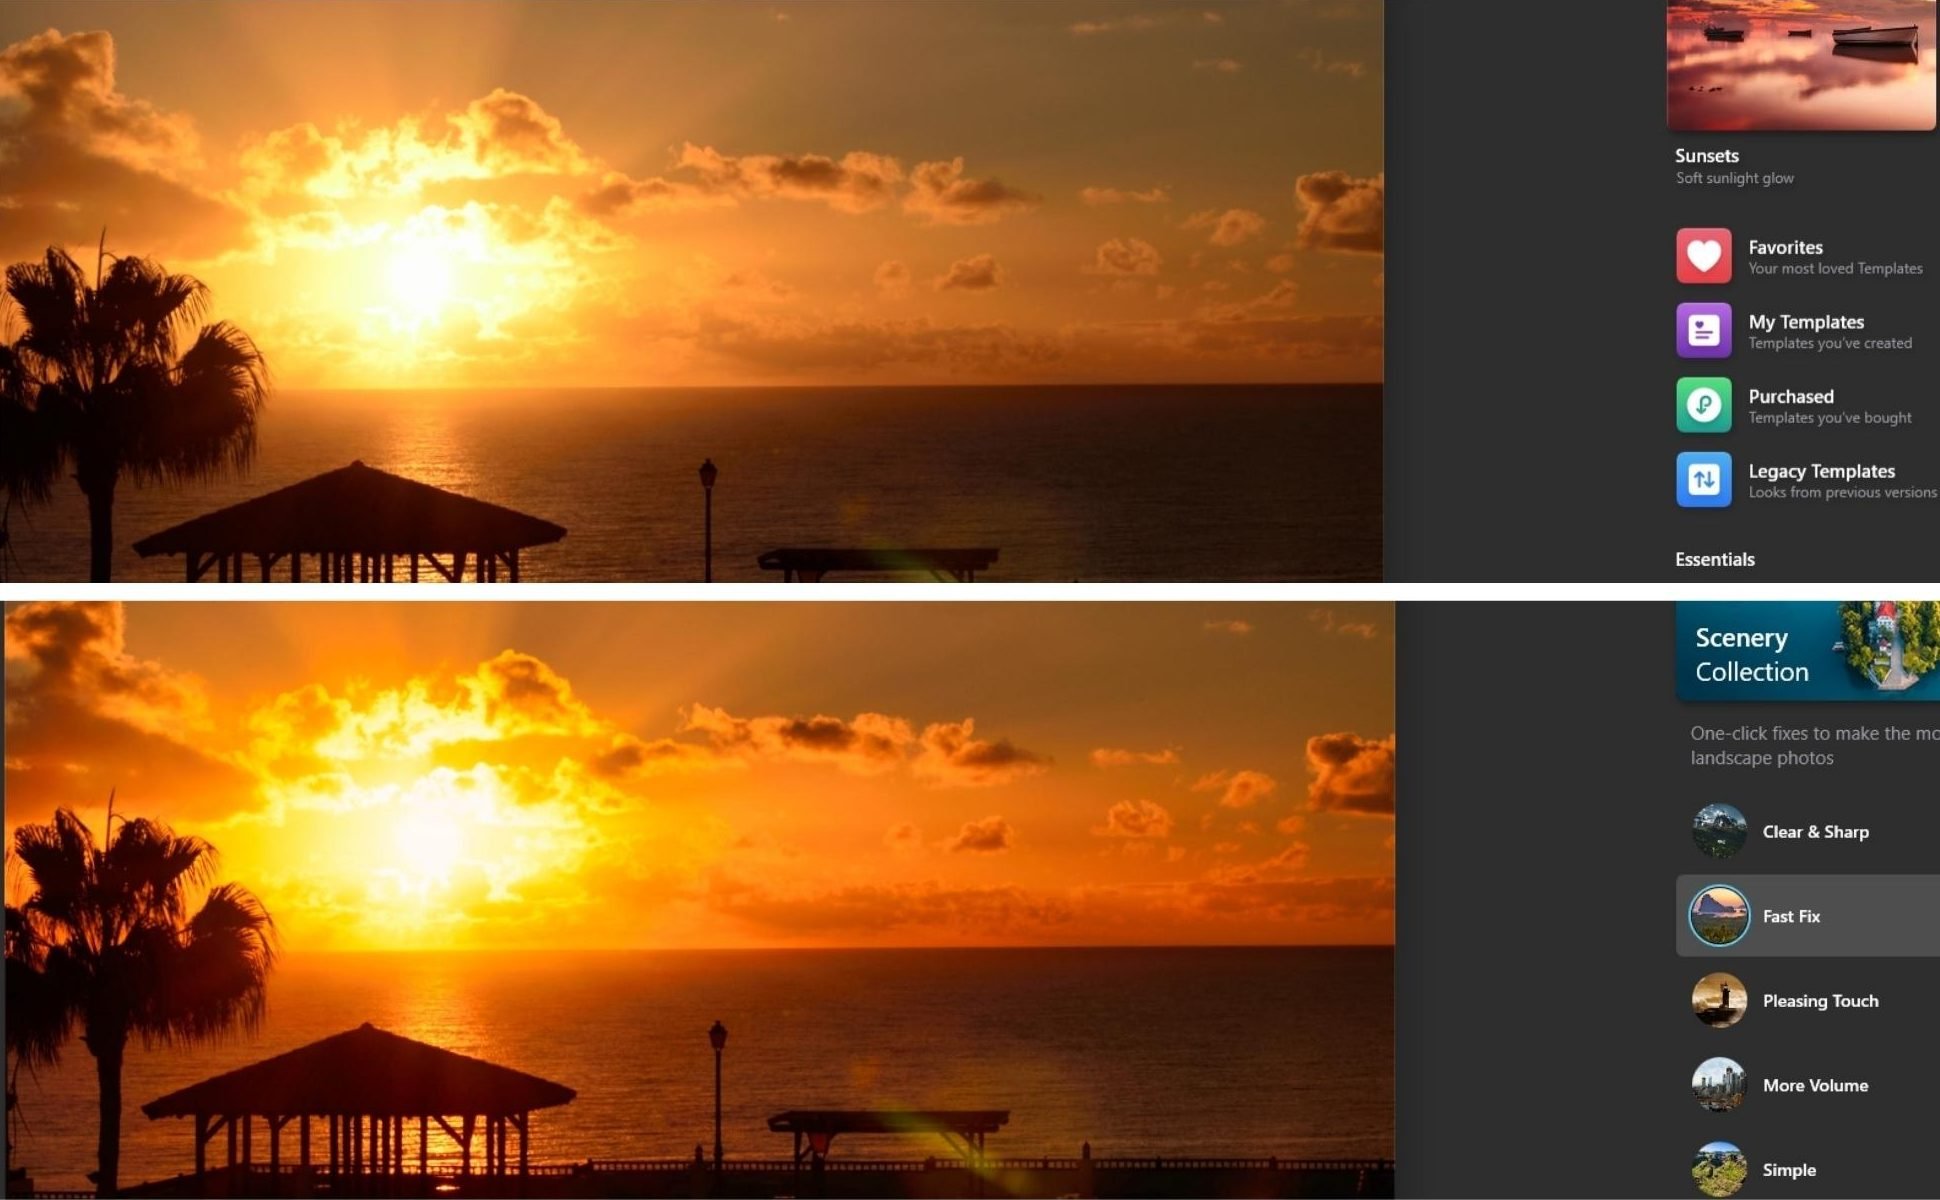 screenshot of Luminar example of images before and after templates applying